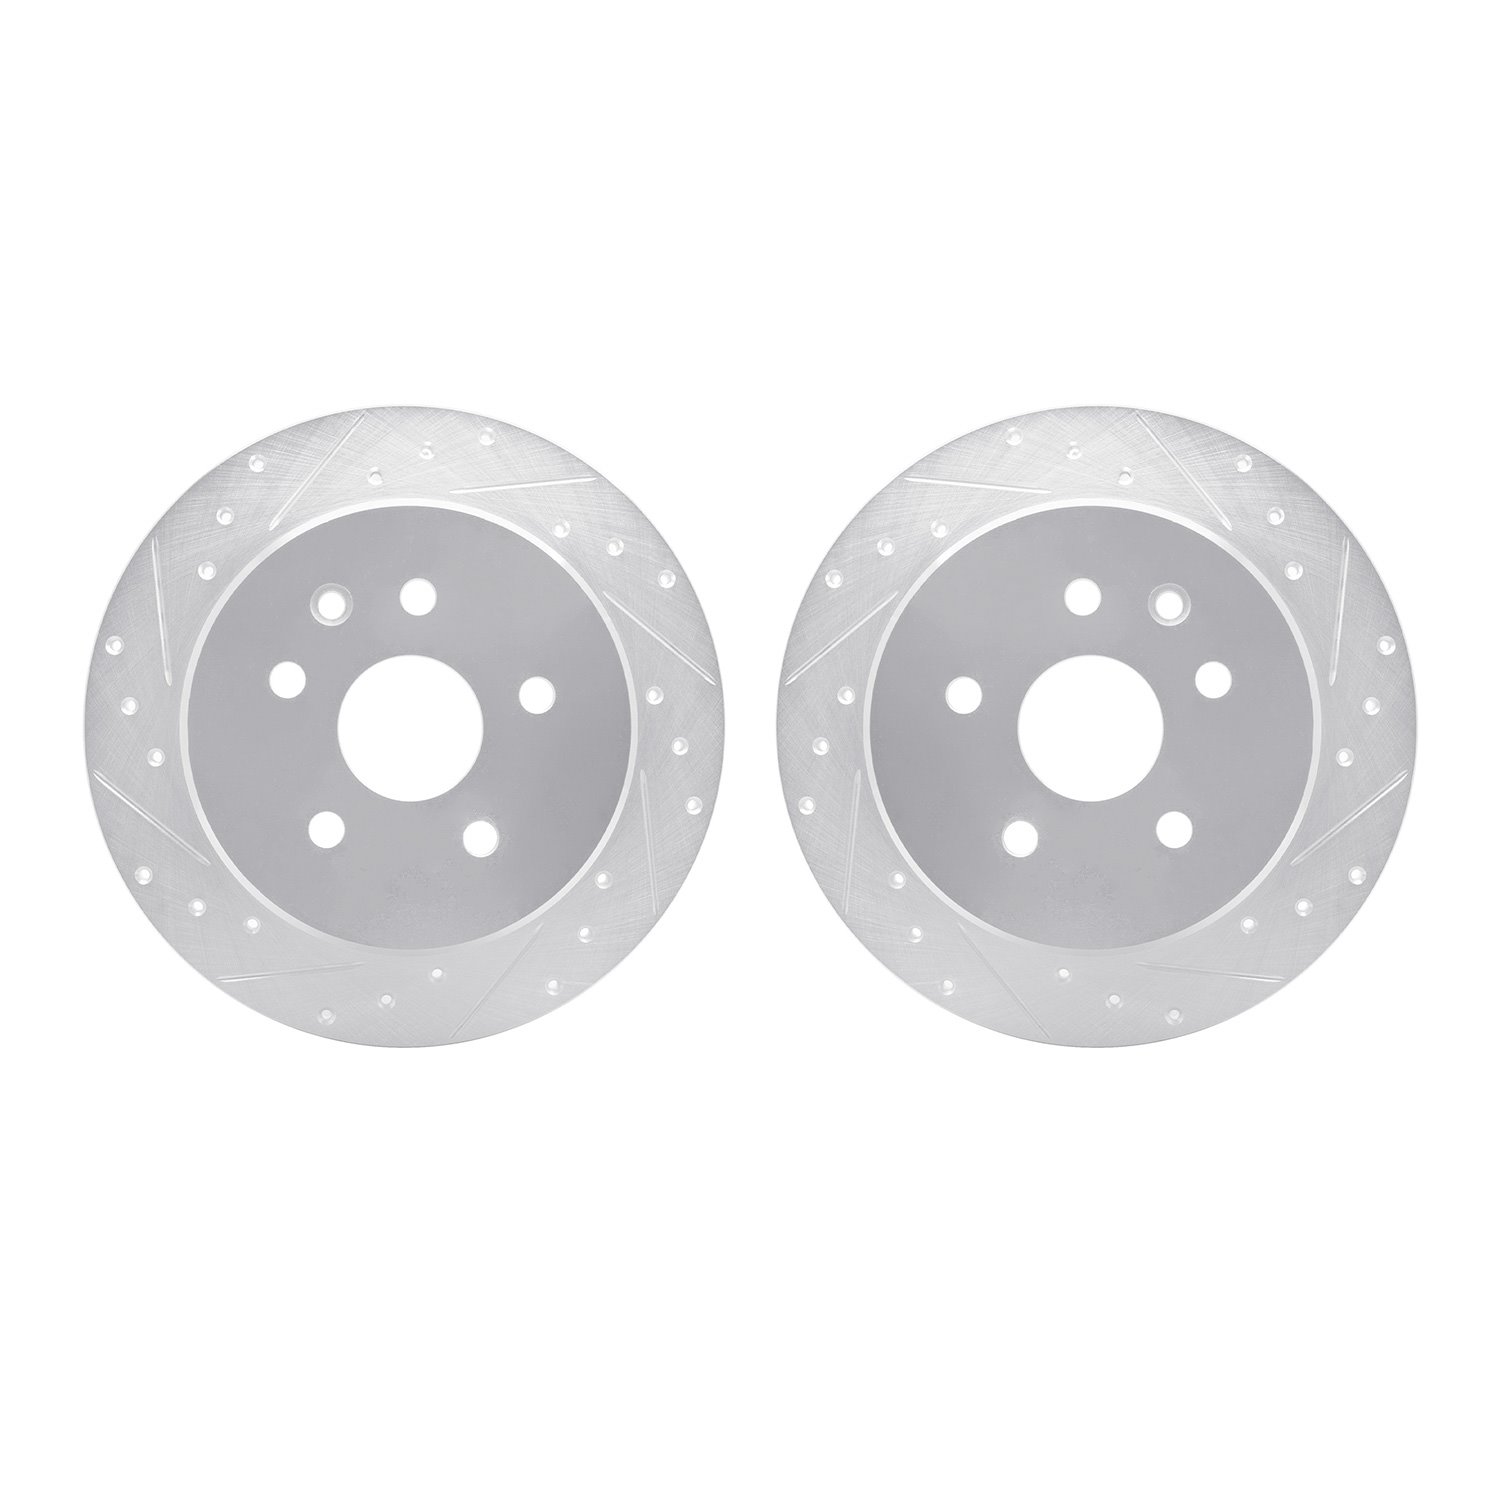 Drilled/Slotted Brake Rotors [Silver], 1998-2010 Lexus/Toyota/Scion